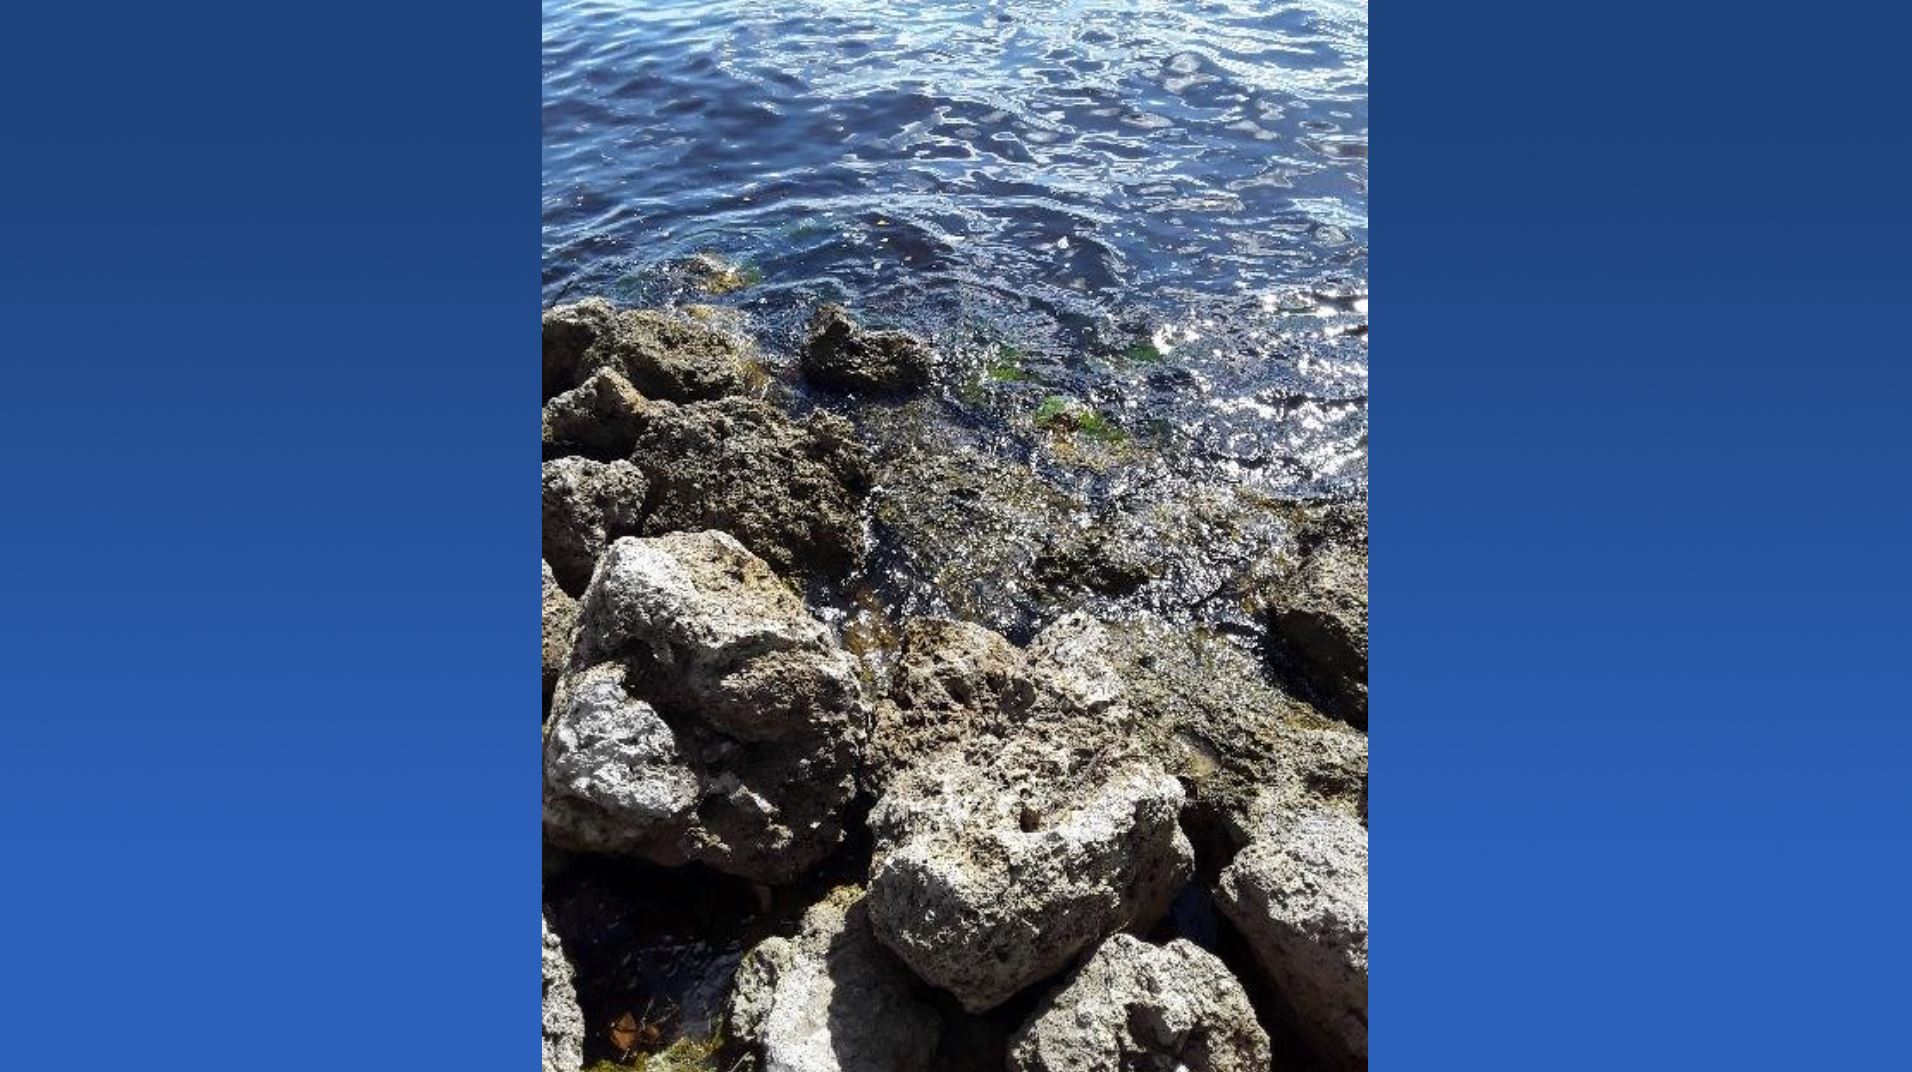 DOH issues health alert for blue-green algae at Jaycee Park in Cape Coral - Wink News